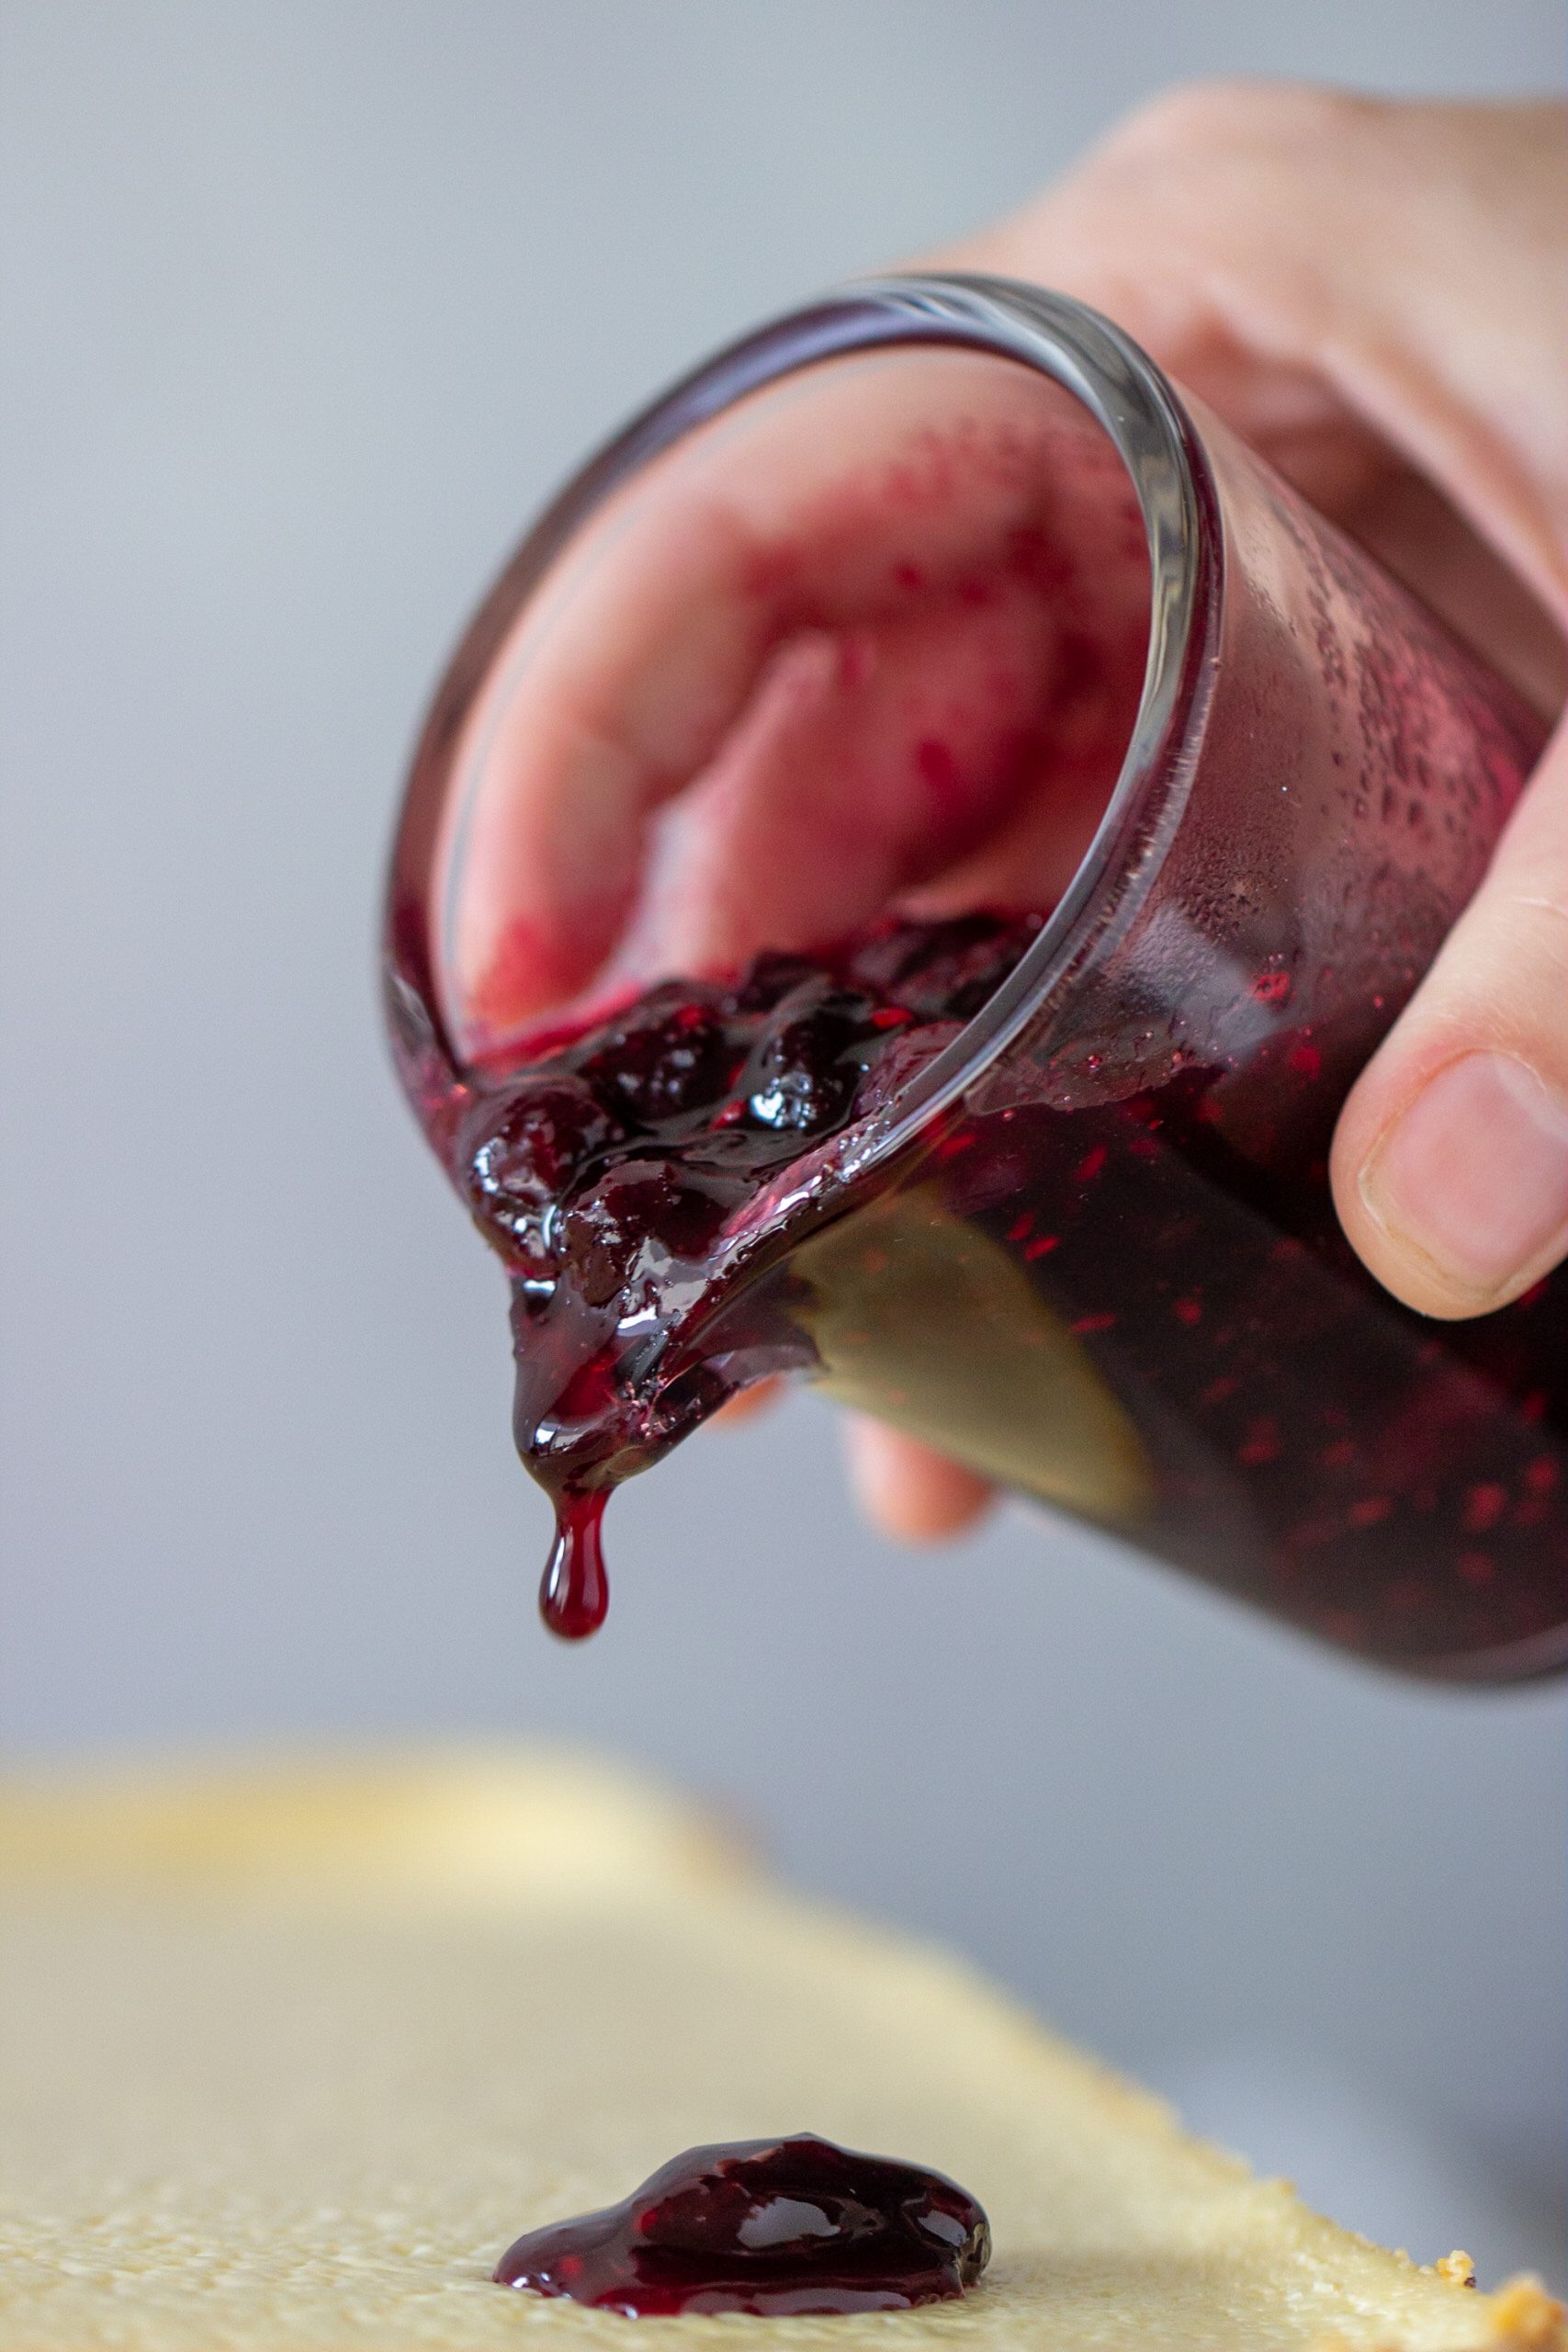 Hand pouring berry sauce from glass jar